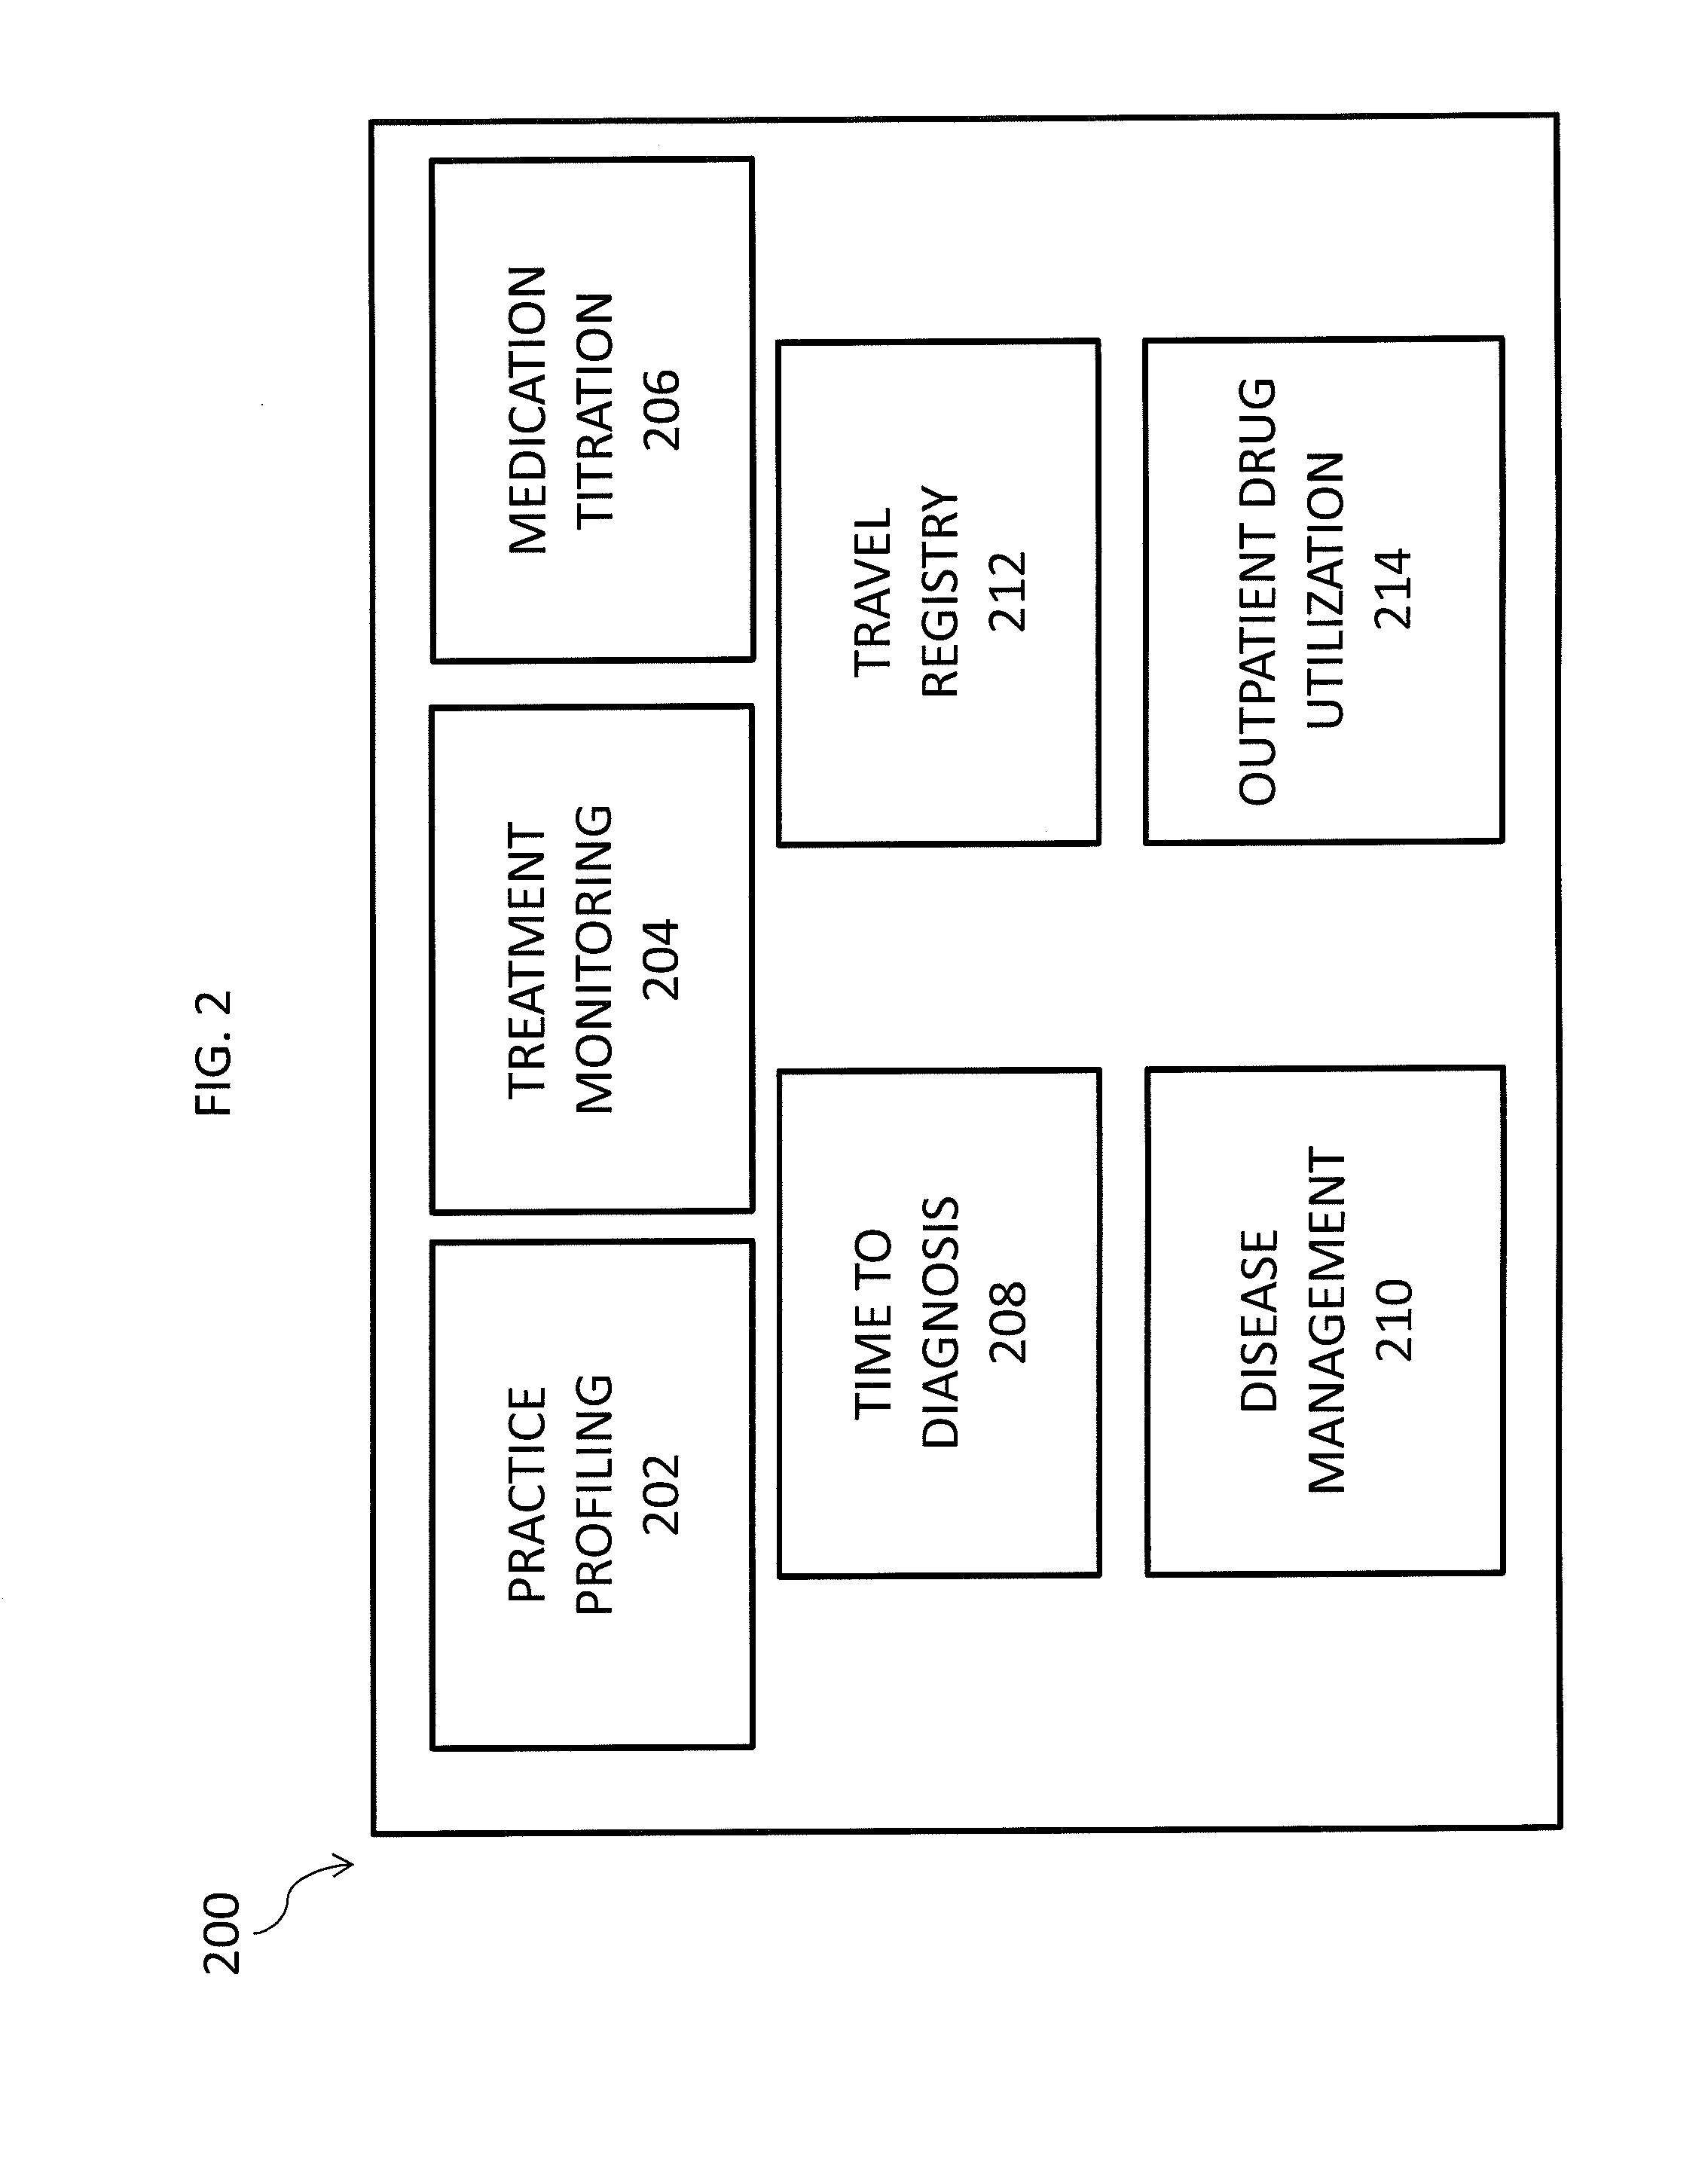 System and methods for health analytics using electronic medical records